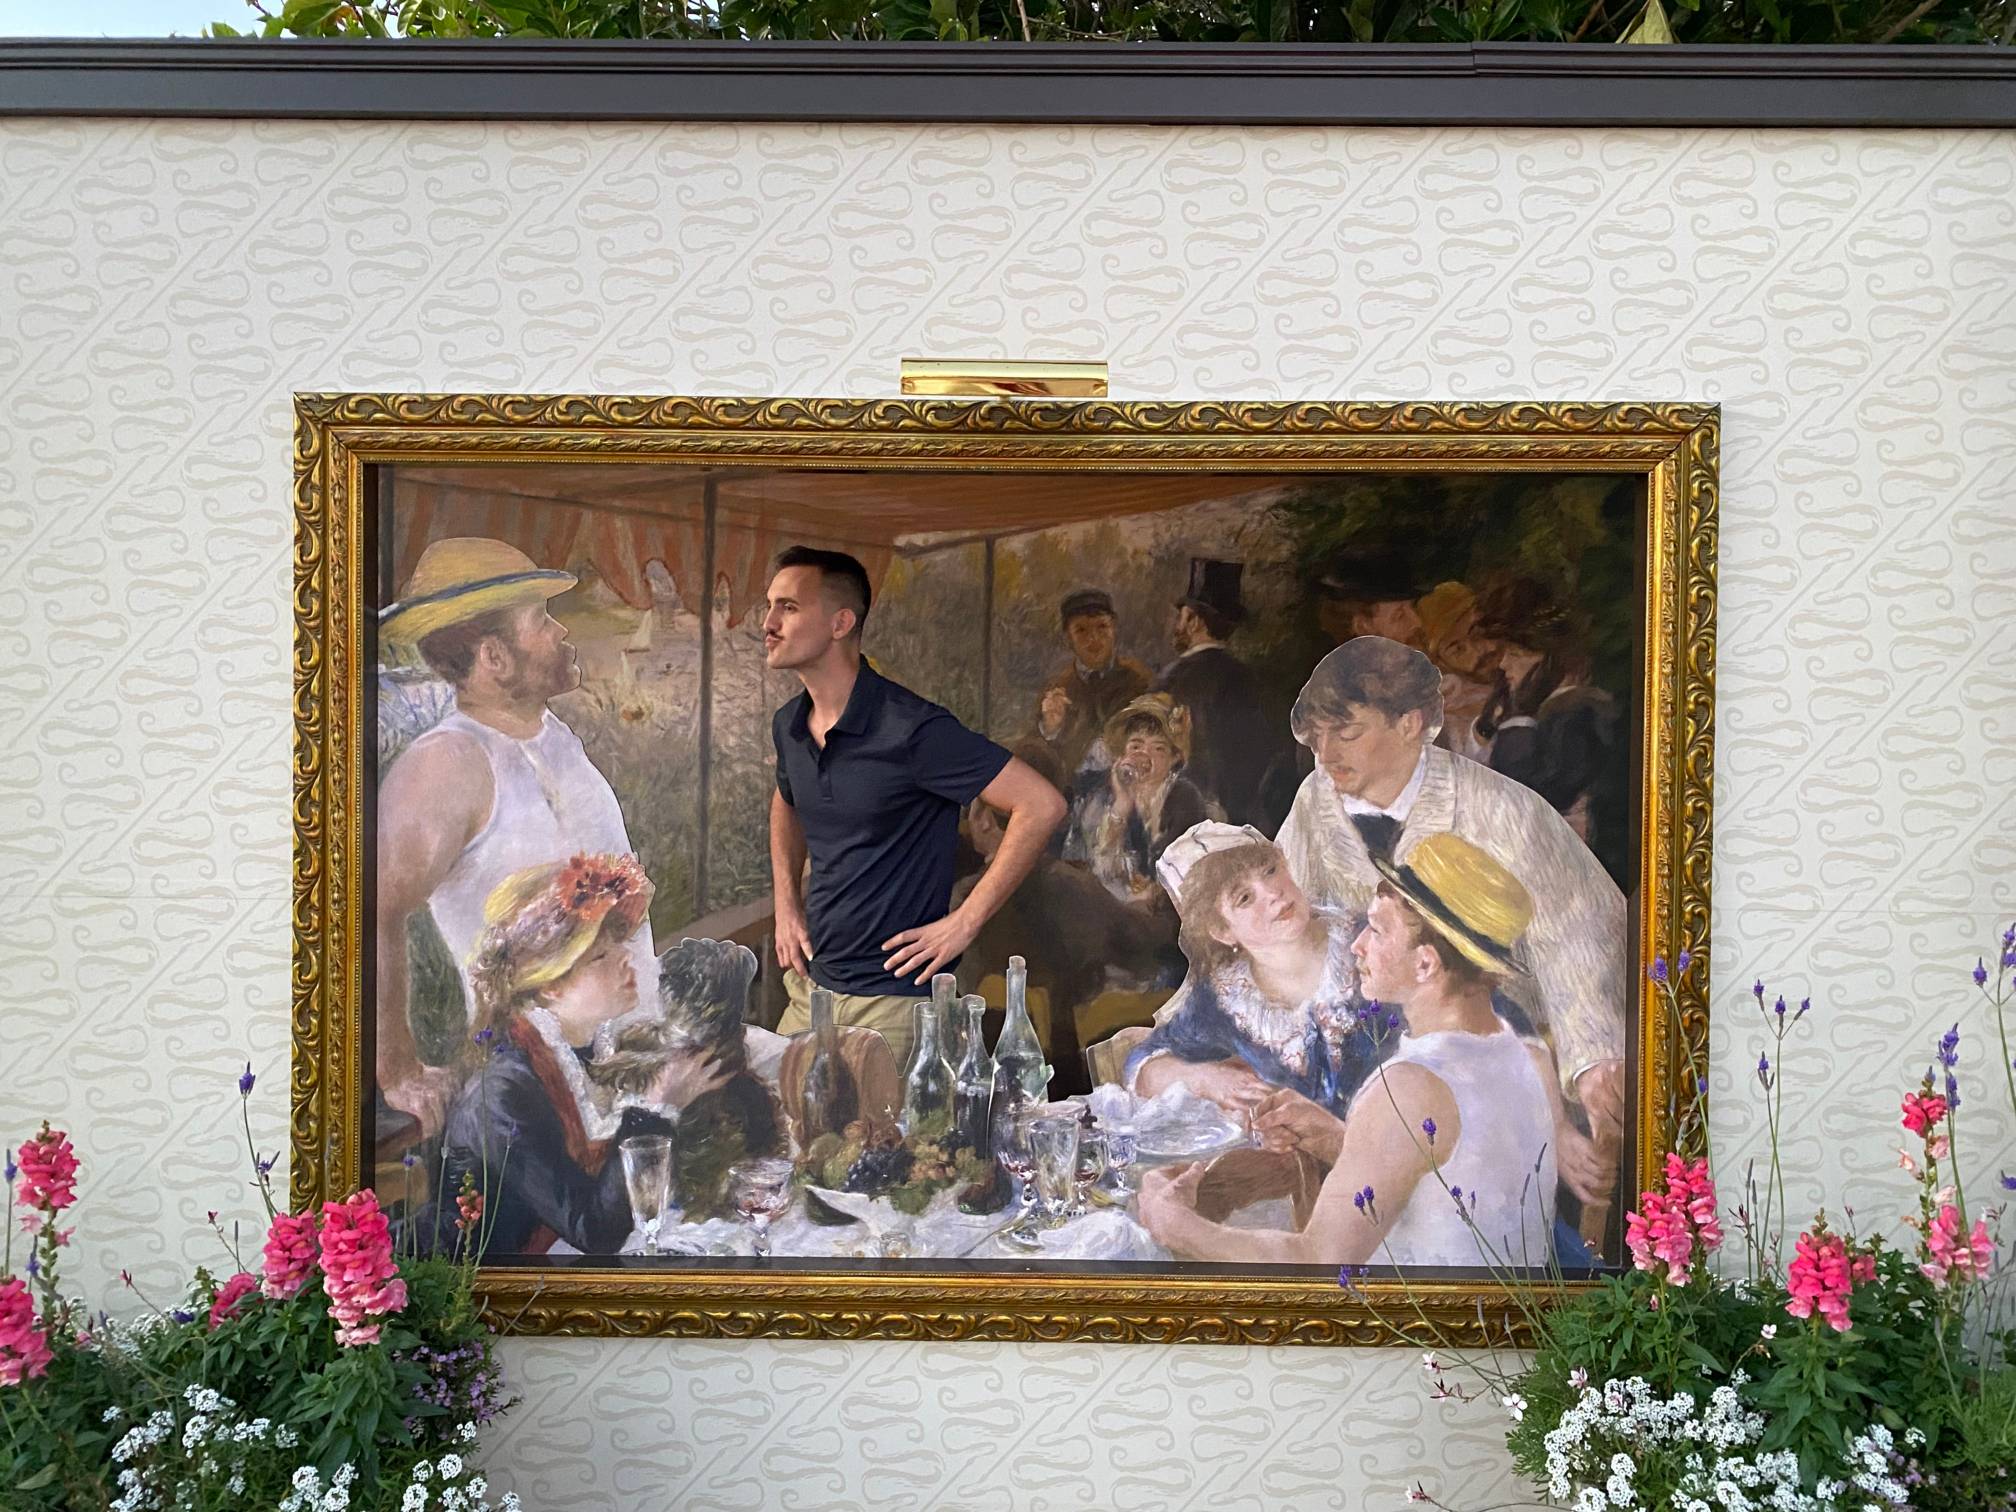 Man wearing blue shirt inserted into Renoir's painting "Luncheon of the Boating Party"